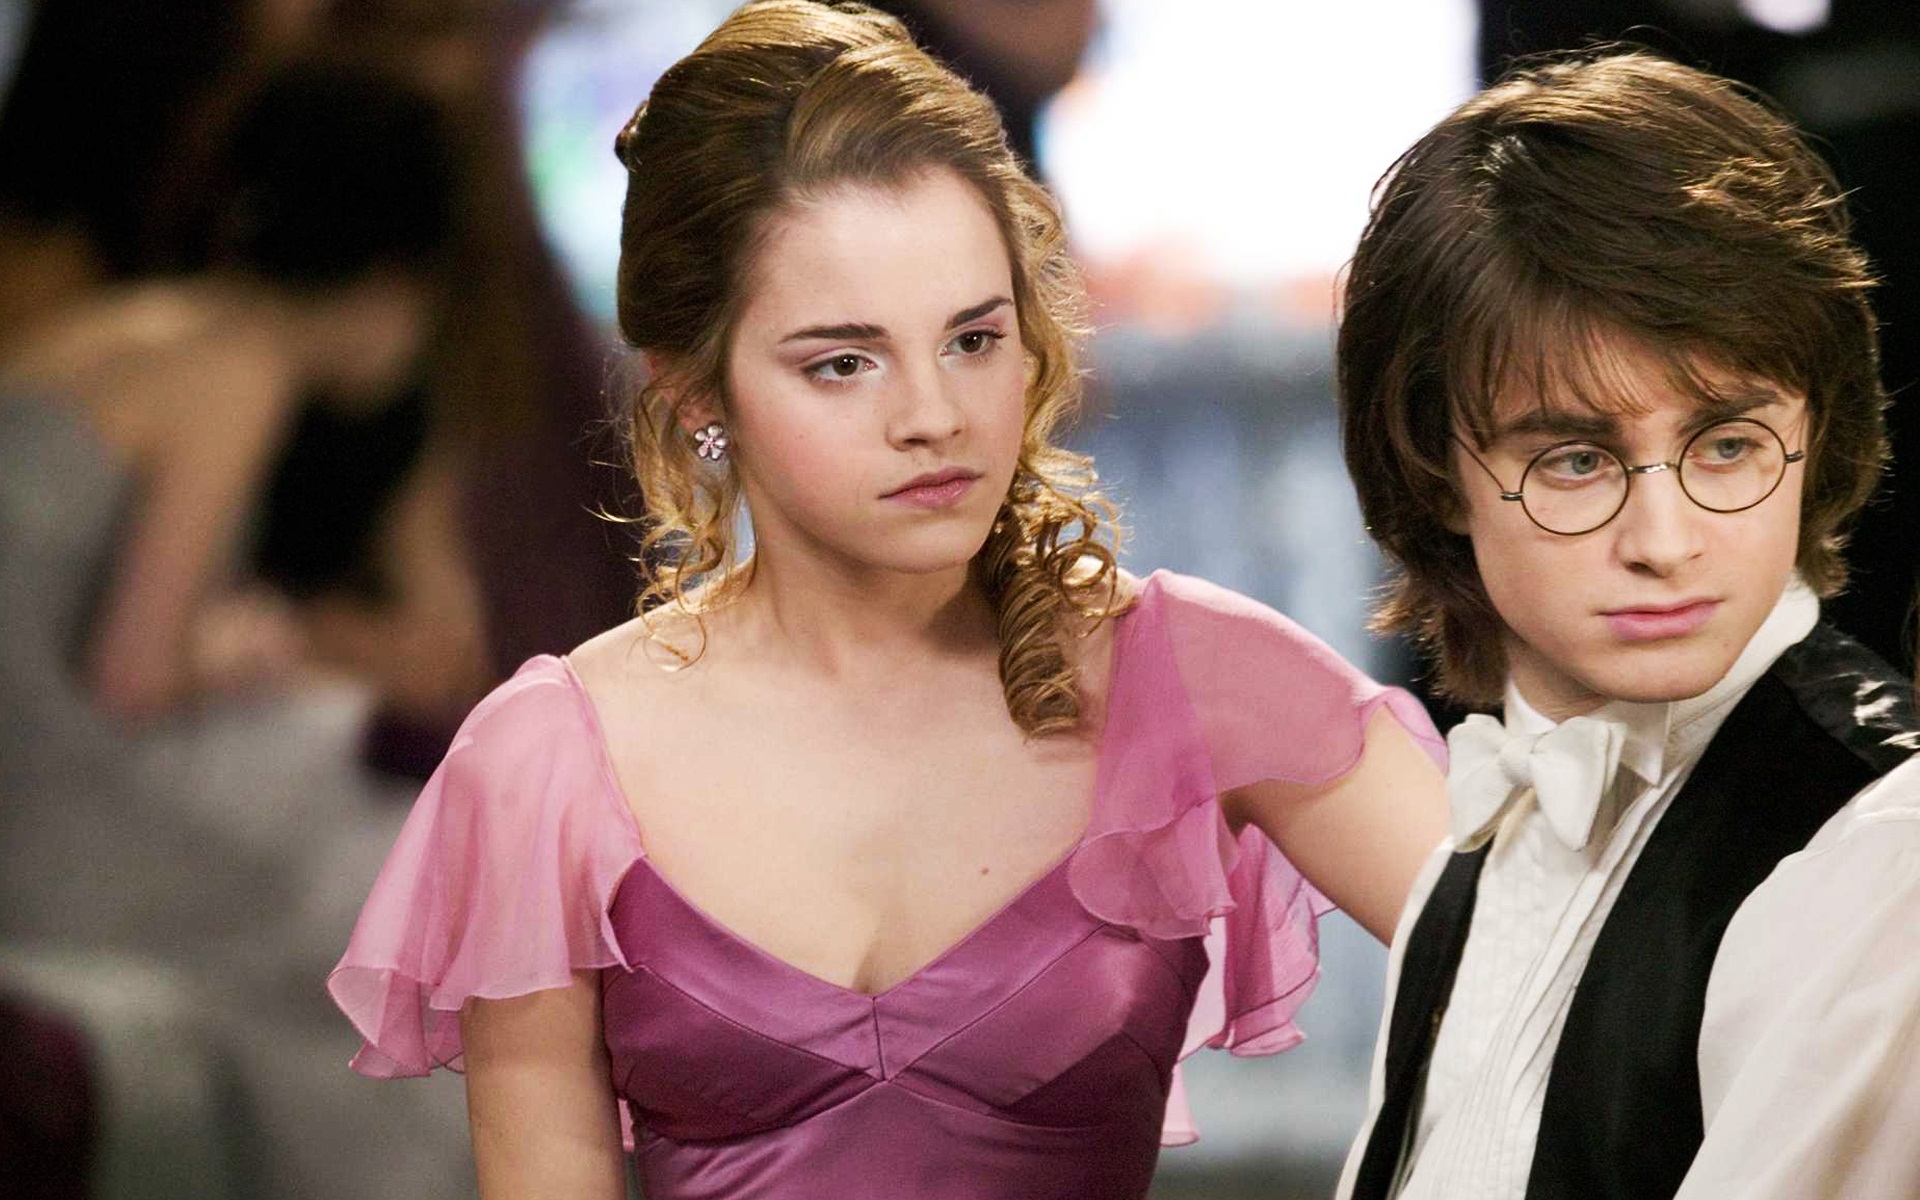 Daniel Radcliffe Emma Watson Harry Potter Harry Potter And The Goblet Of Fire Hermione Granger 1920x1200